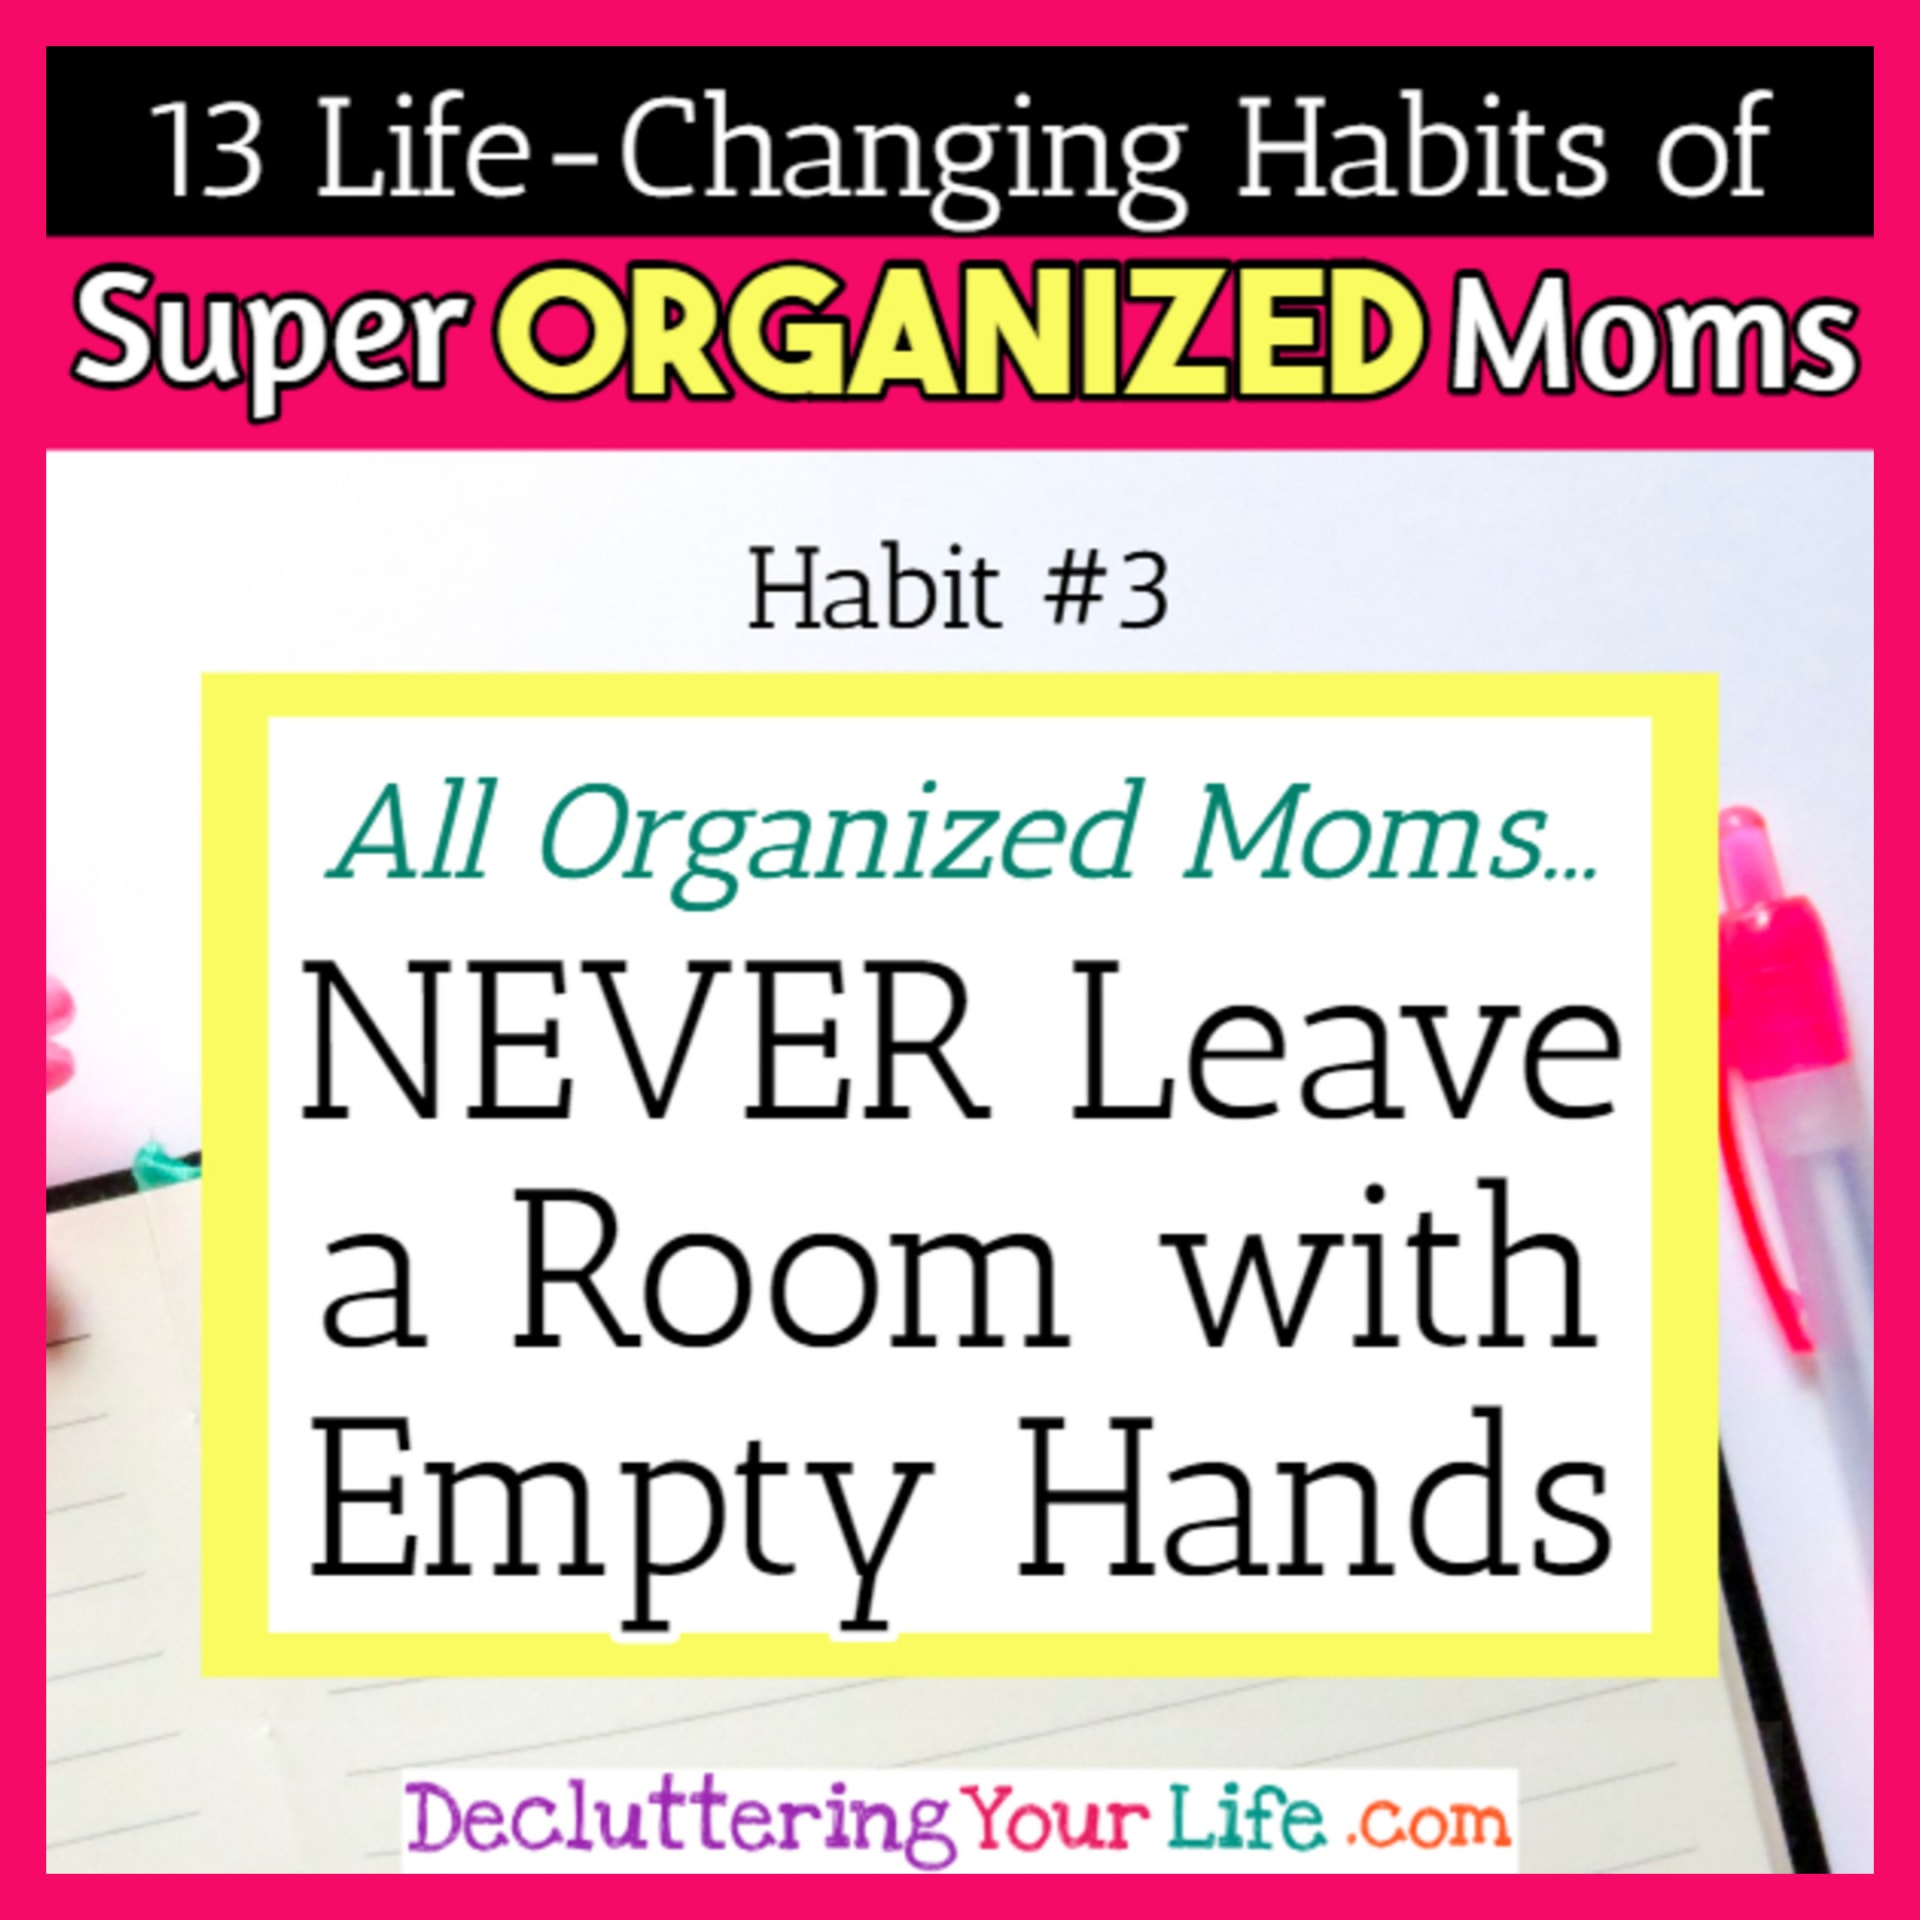 Organized moms reduce clutter and a messy house with this cleaning hack - 13 Habits of Super Organized Mom - How To Be An Organized Mom (whether you work OR stay at home)